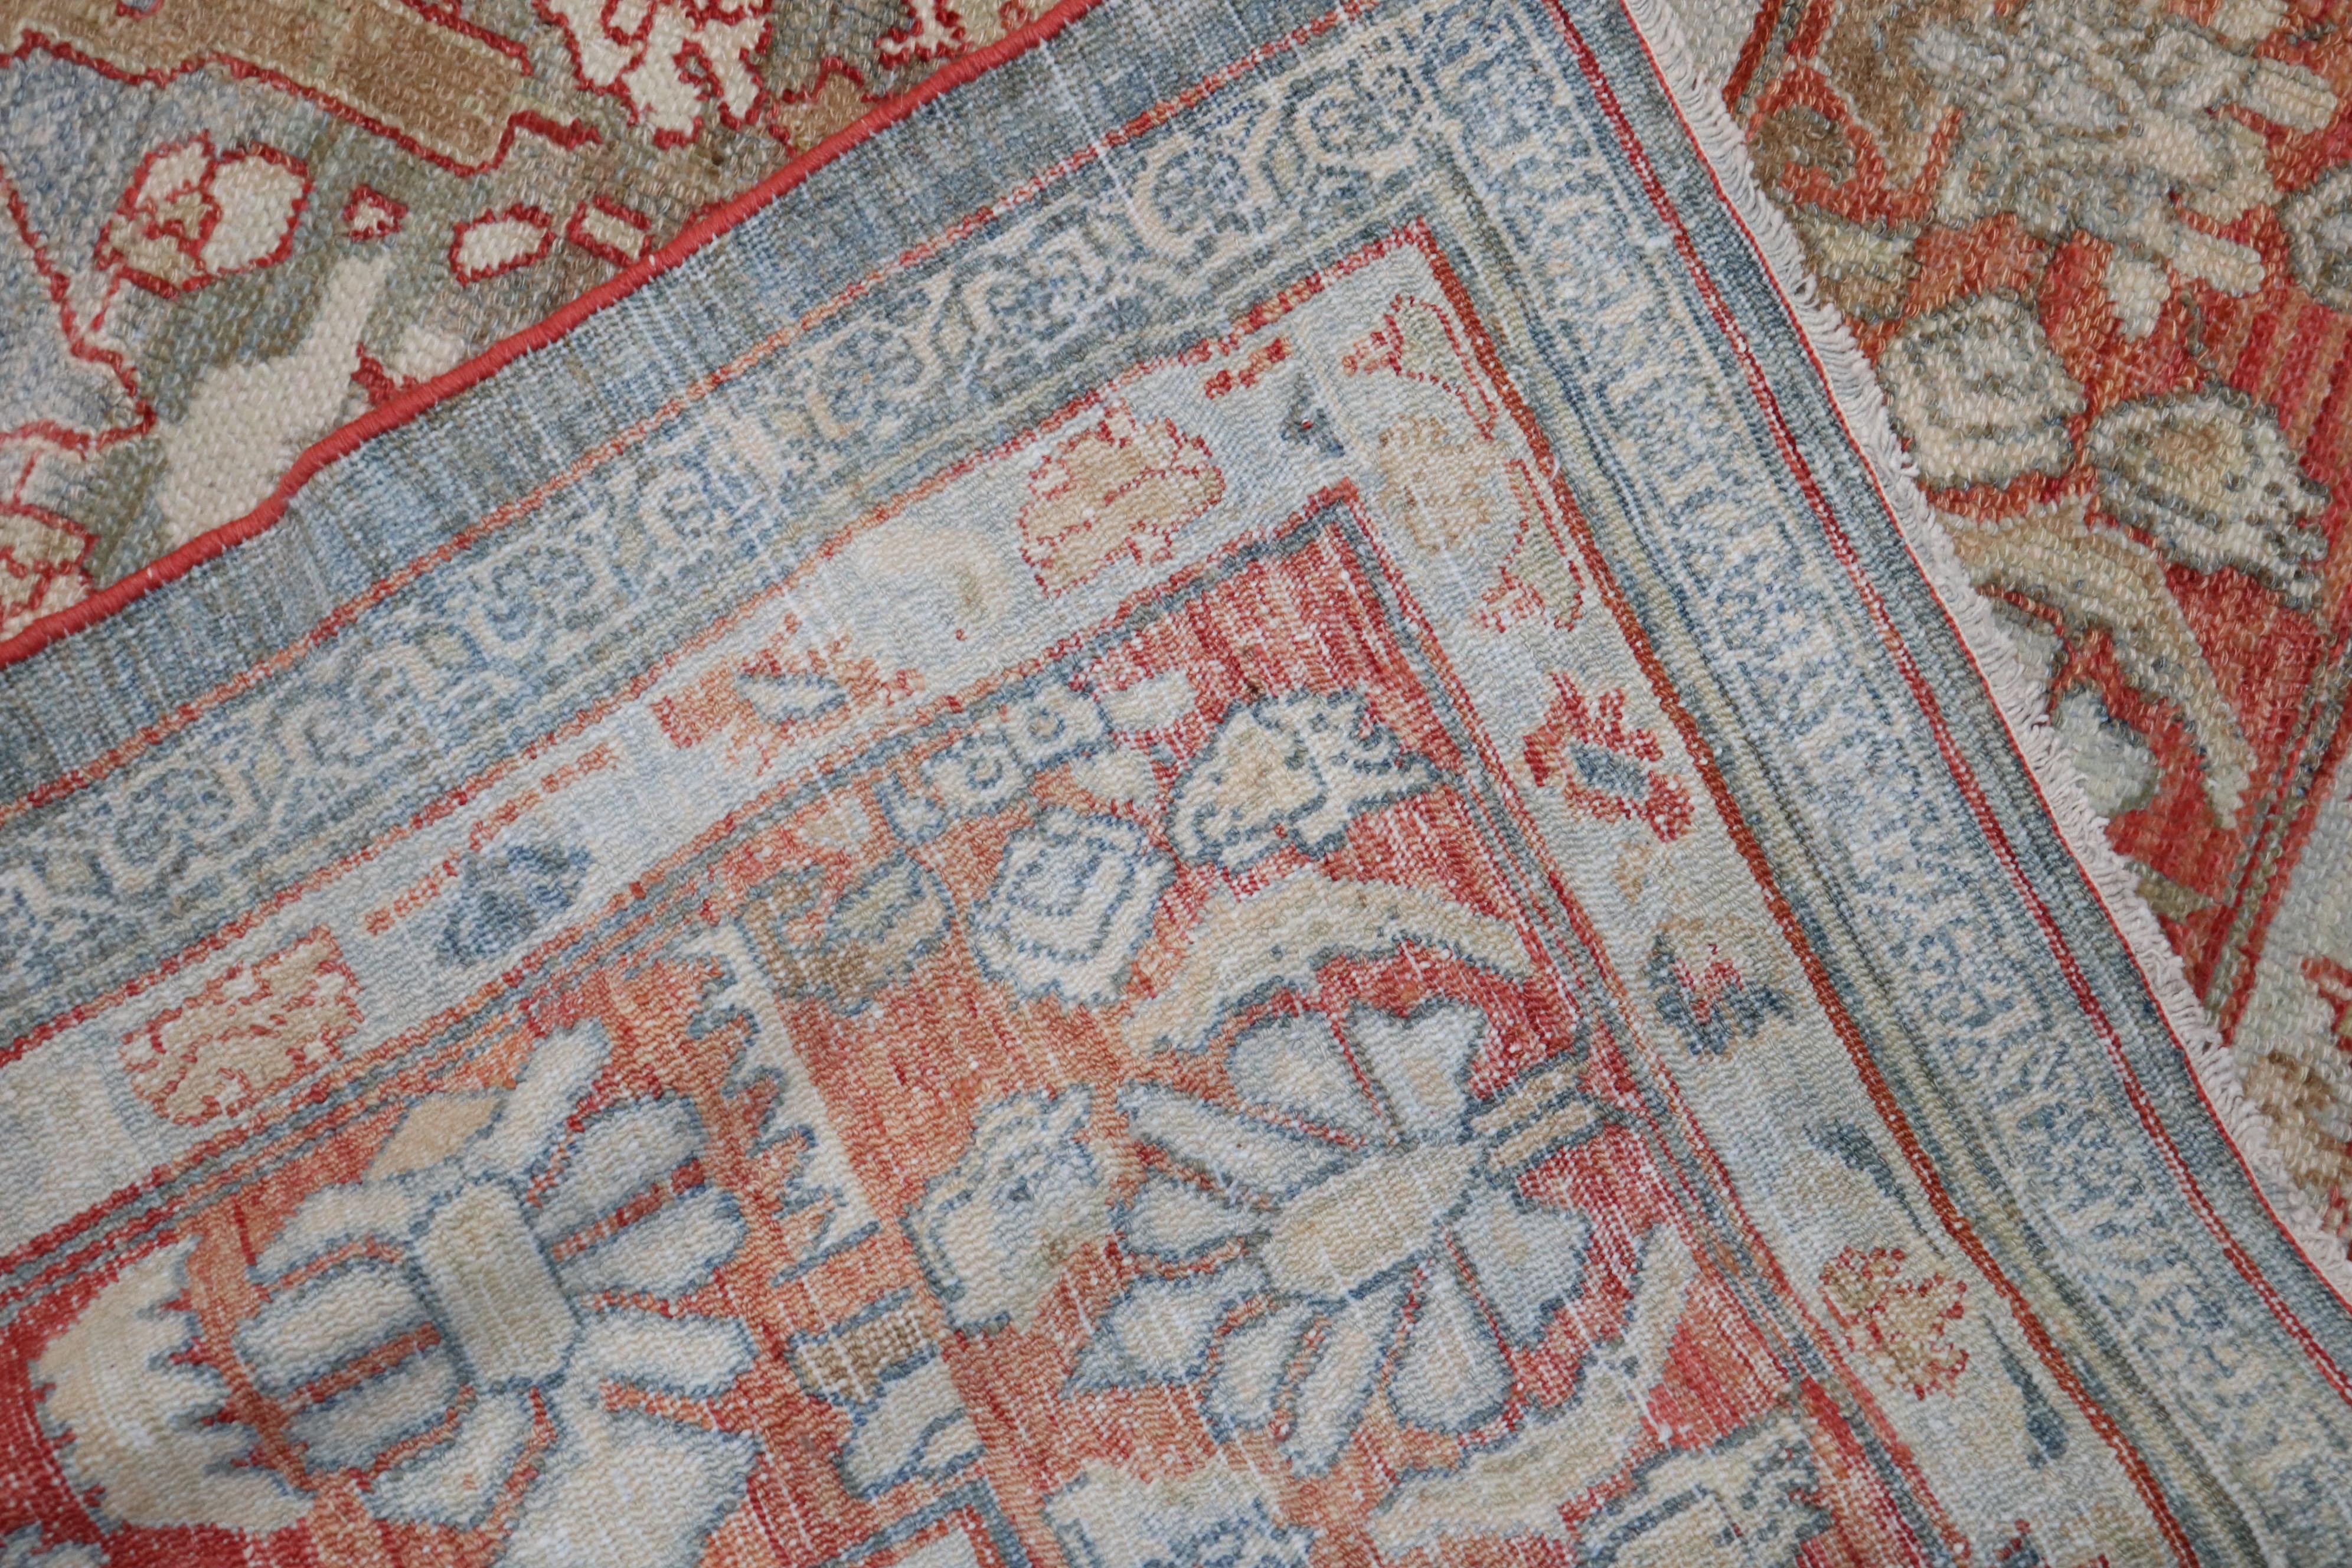 An early 20th century Persian Bibikabad rug with a striking gray blue field and soft red border. Accents in brown, silver and ivory.

Measures: 10'7